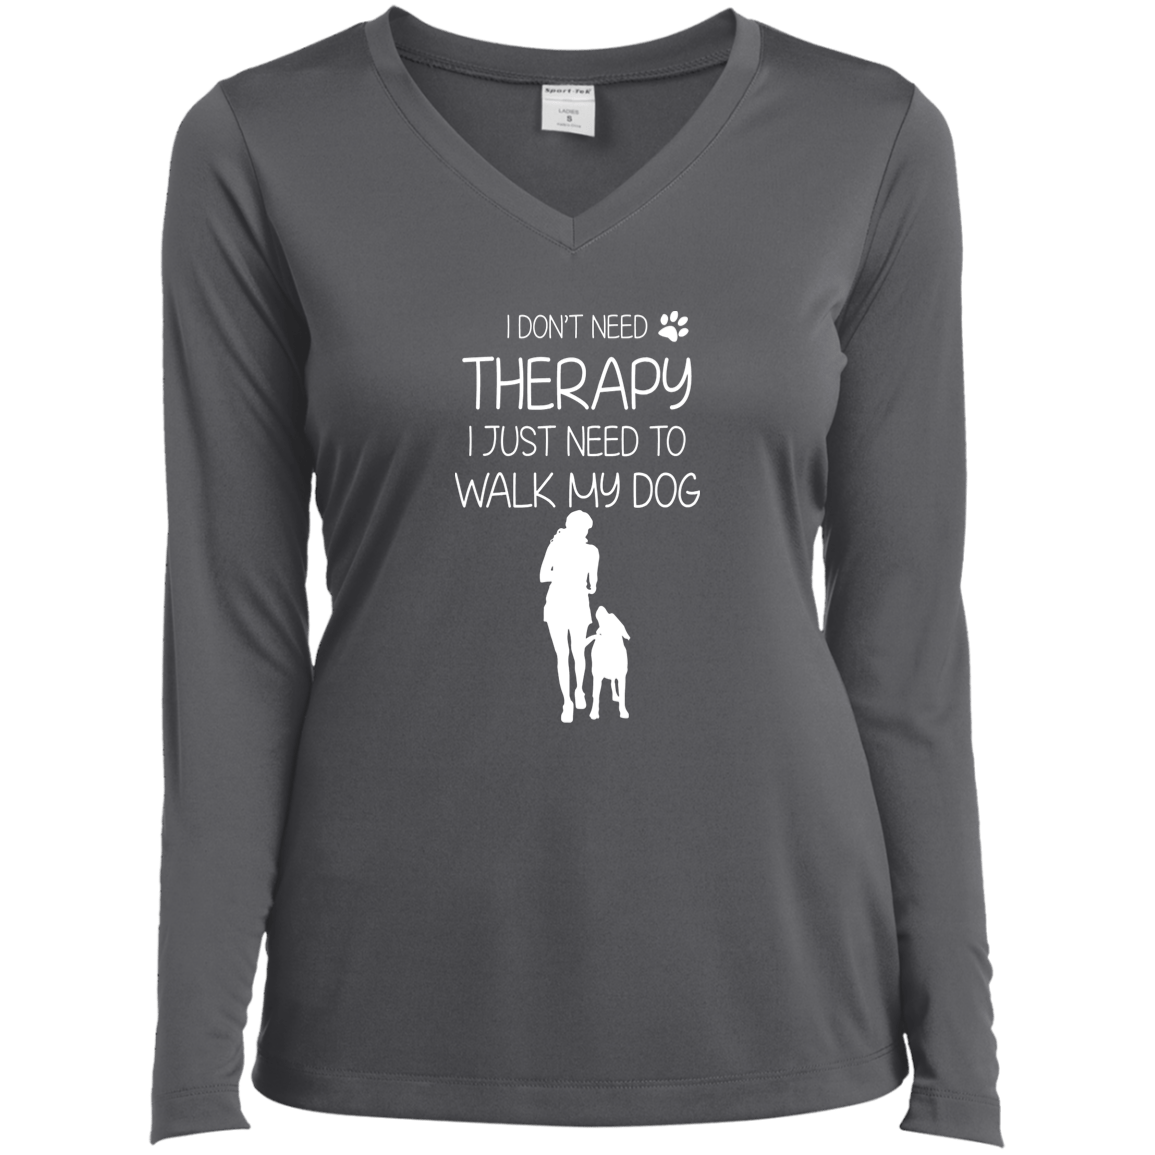 I Don't Need Therapy - Long Sleeve Ladies V Neck.